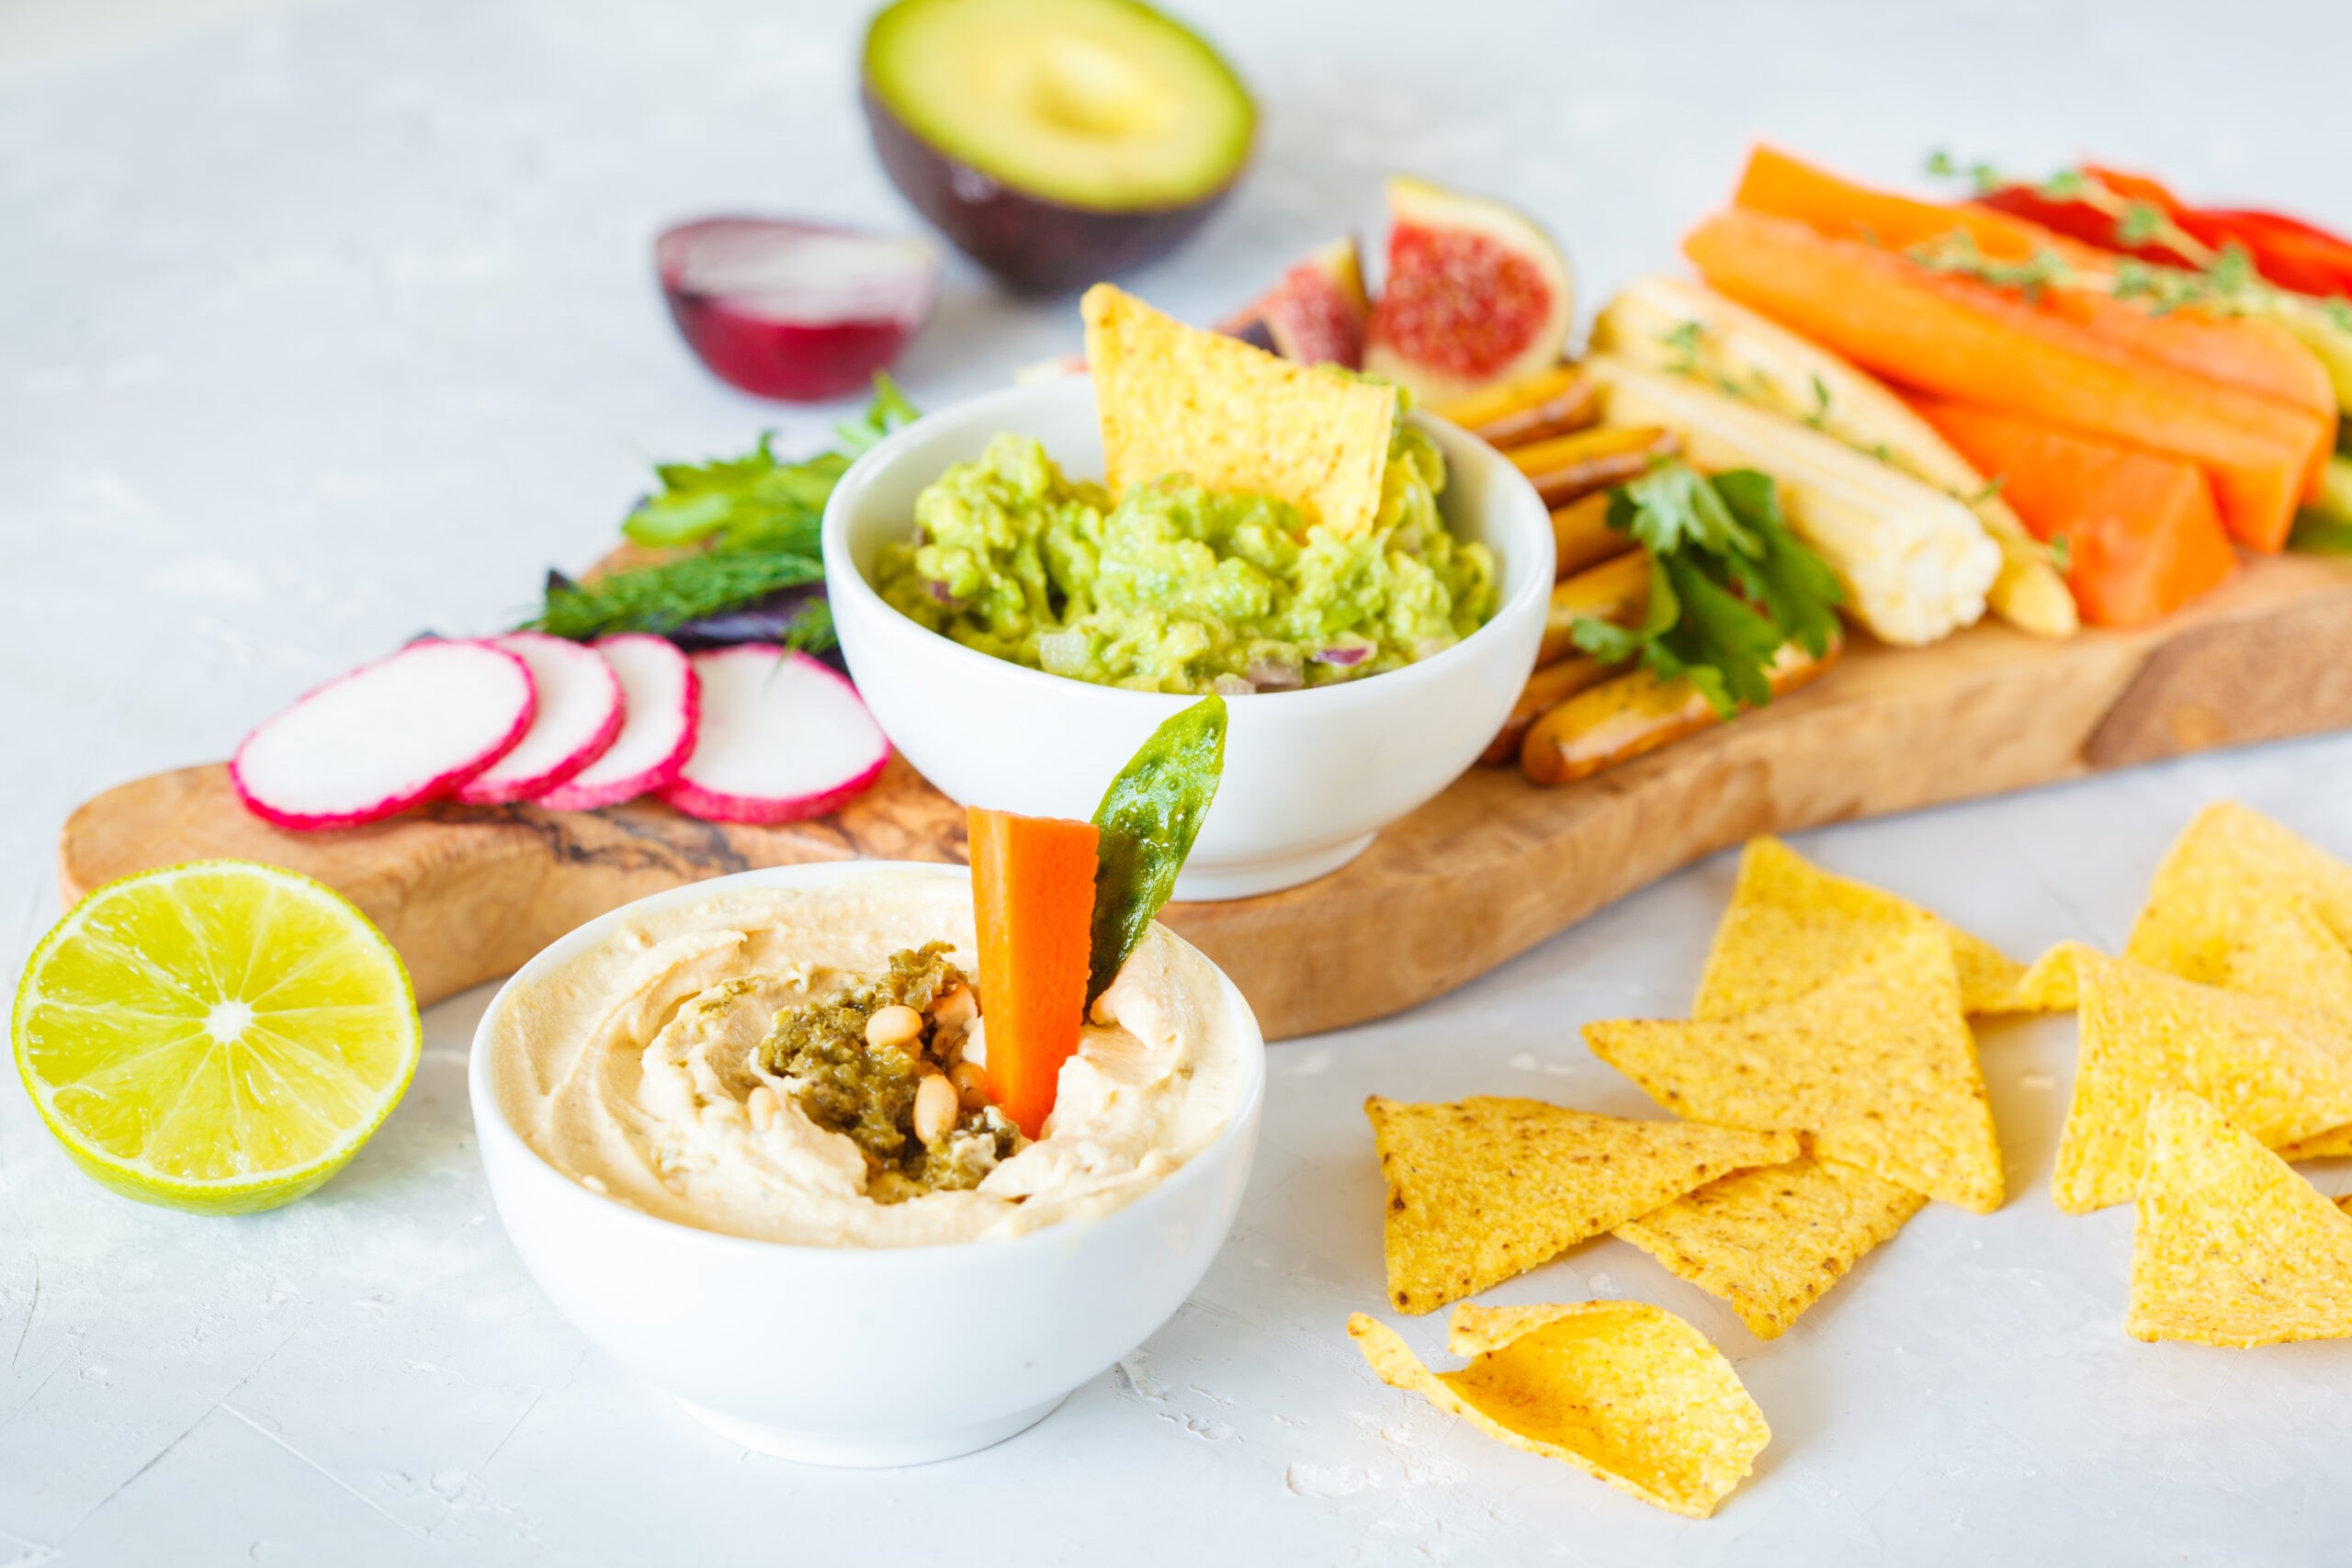 Chips and vegetables with dips